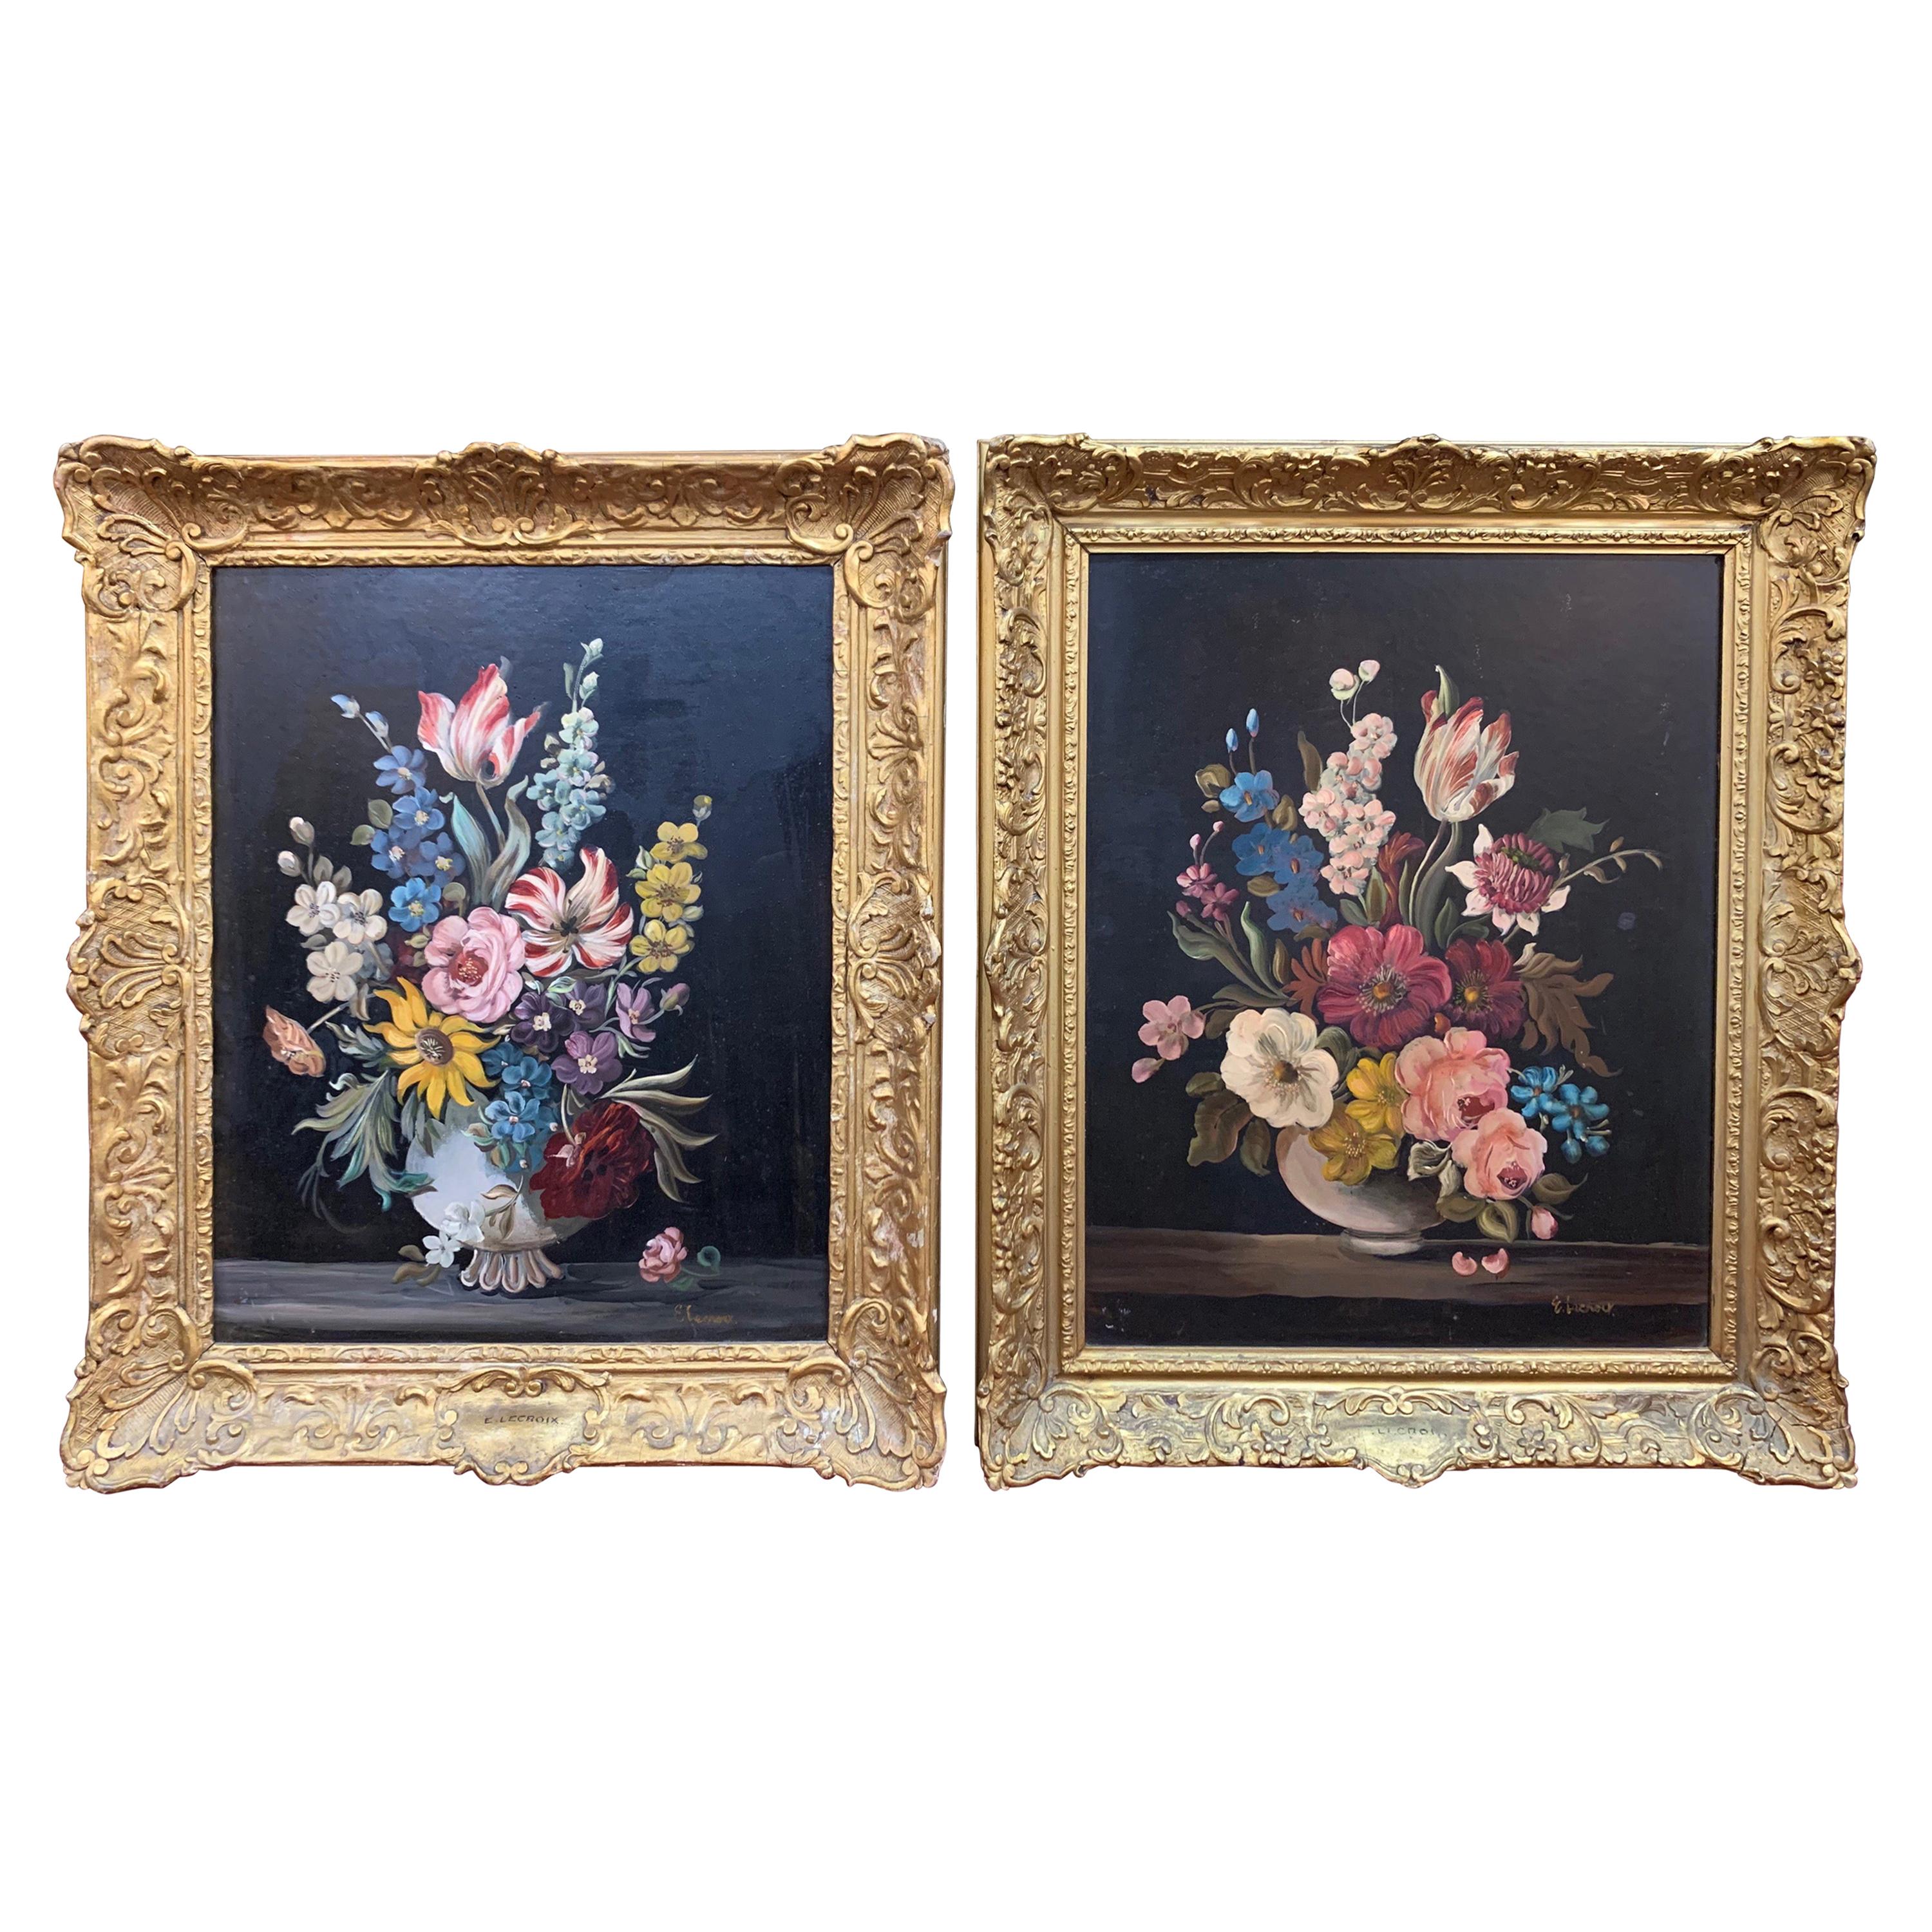 Pair of Continental School Floral Still Life Paintings on Copper